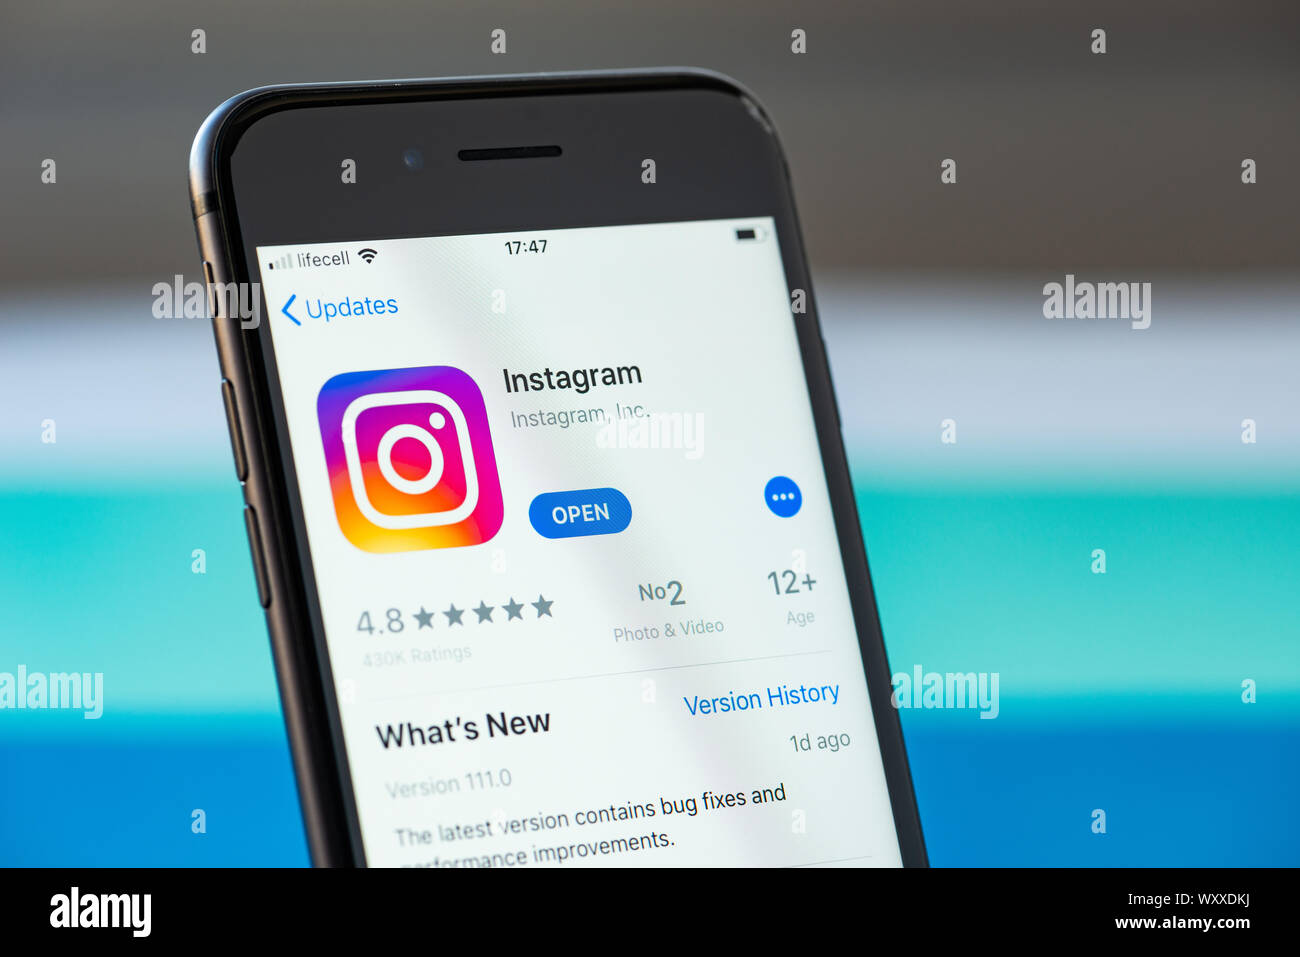 Kyiv, Ukraine - September 17, 2019: Studio shot of Apple iPhone 8 smartphone with an Instagram mobile application on the screen Stock Photo